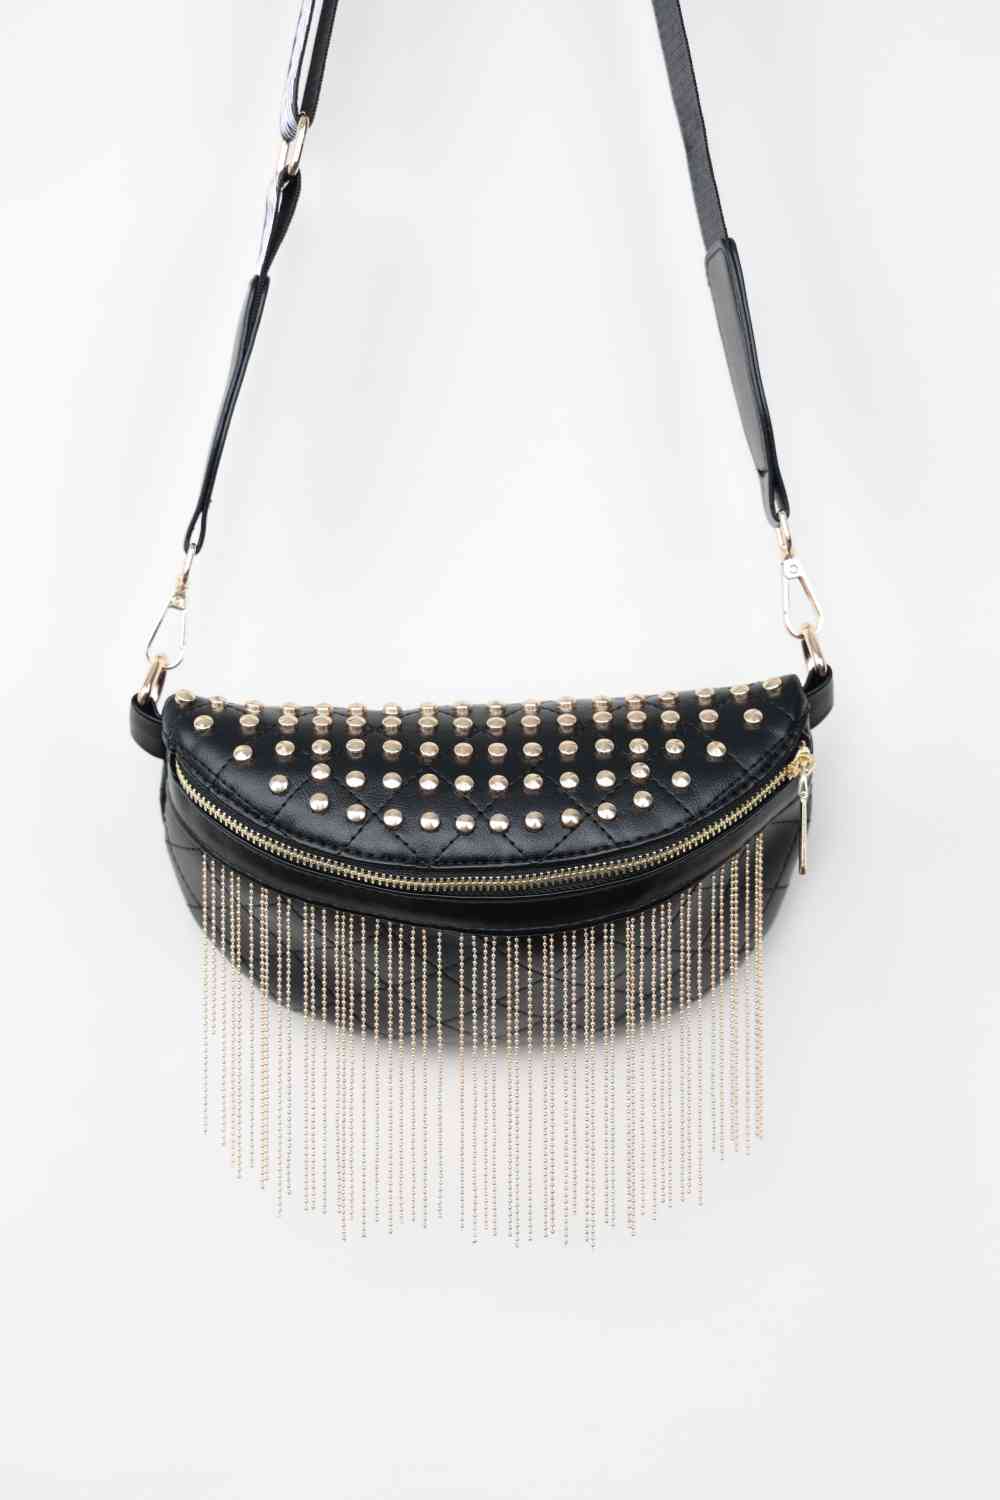 Adored PU Leather Studded Sling Bag with Fringes Gold One Size